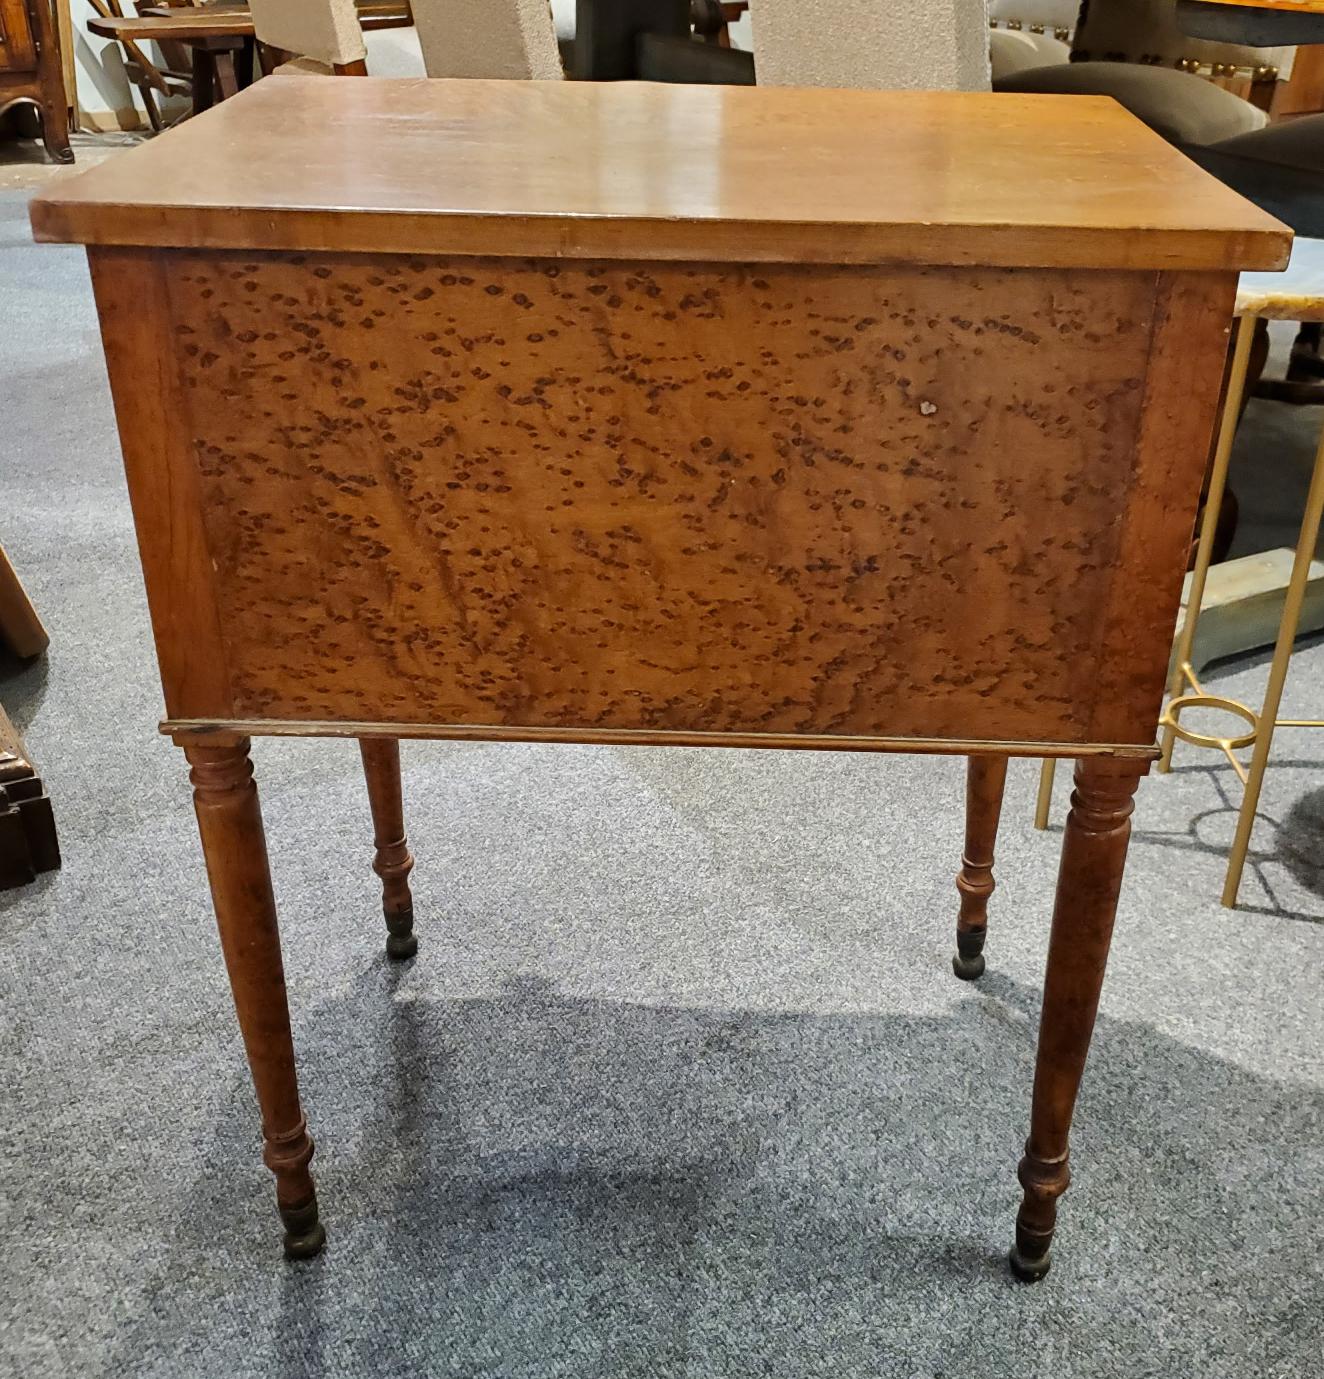 Neoclassical Mid 19th Century New England Birdseye Maple Side Table with Two Drawers For Sale